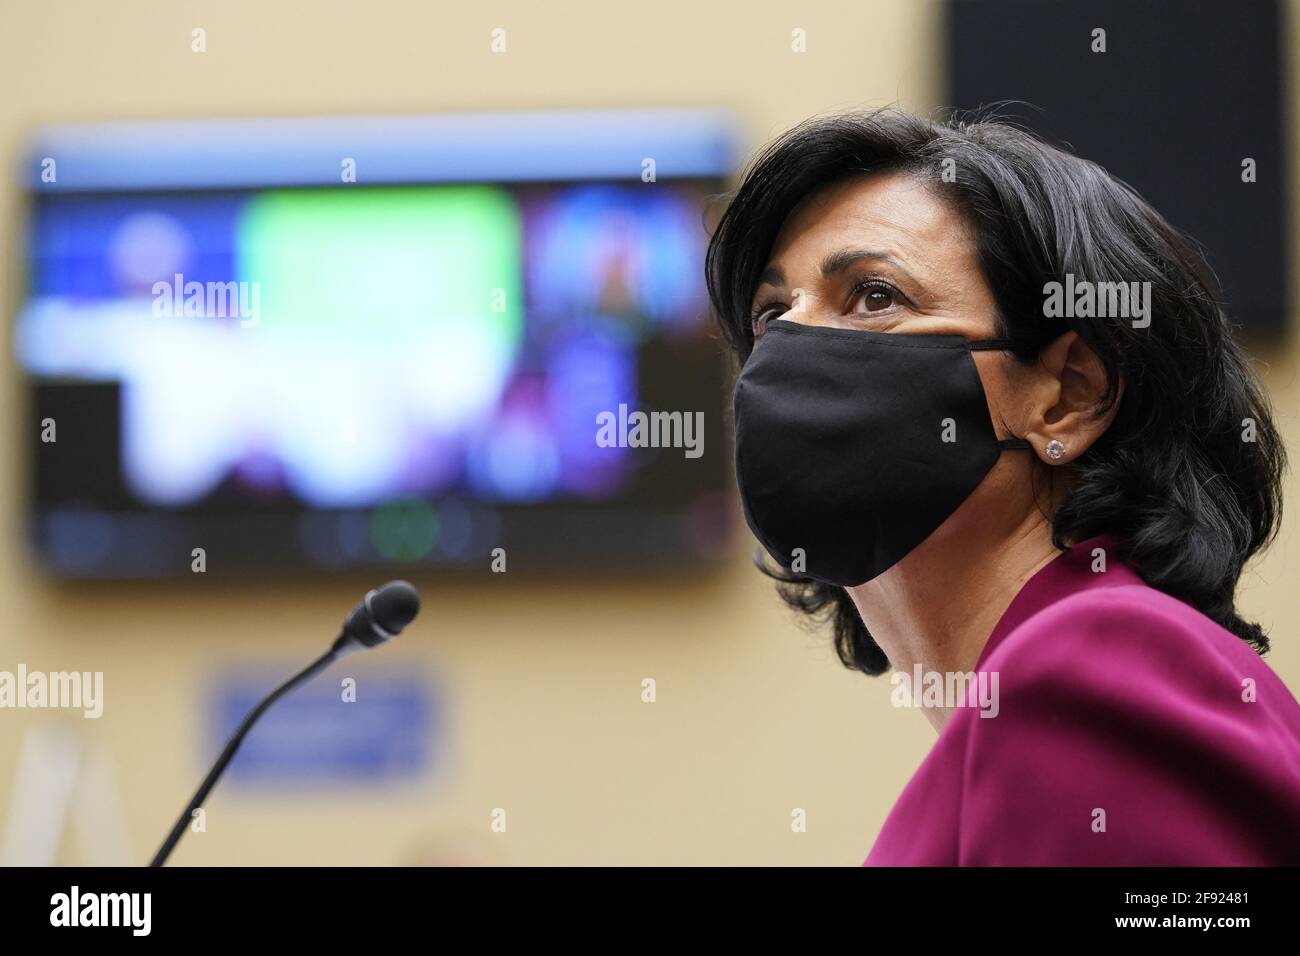 Centers for Disease Control and Prevention Director Dr. Rochelle Walensky listens during a House Select Subcommittee on the Coronavirus Crisis hearing on Capitol Hill in Washington, Thursday, April 15, 2021. (AP Photo/Susan Walsh, Pool) Stock Photo